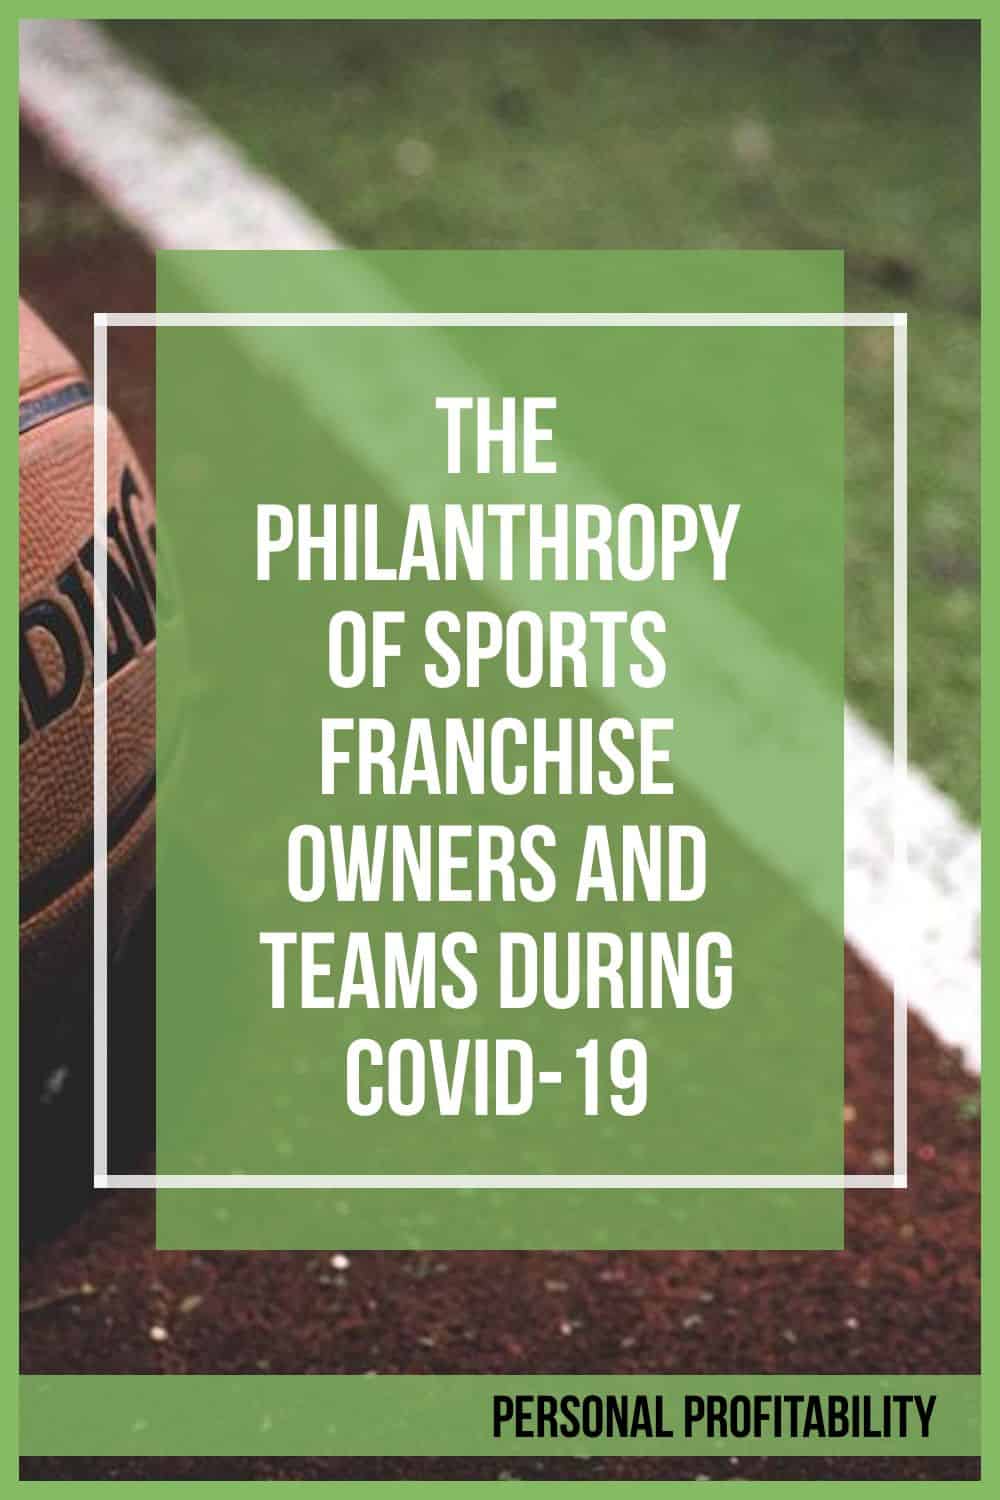 The Philanthropy of Sports Franchise Owners and Teams During COVID-19